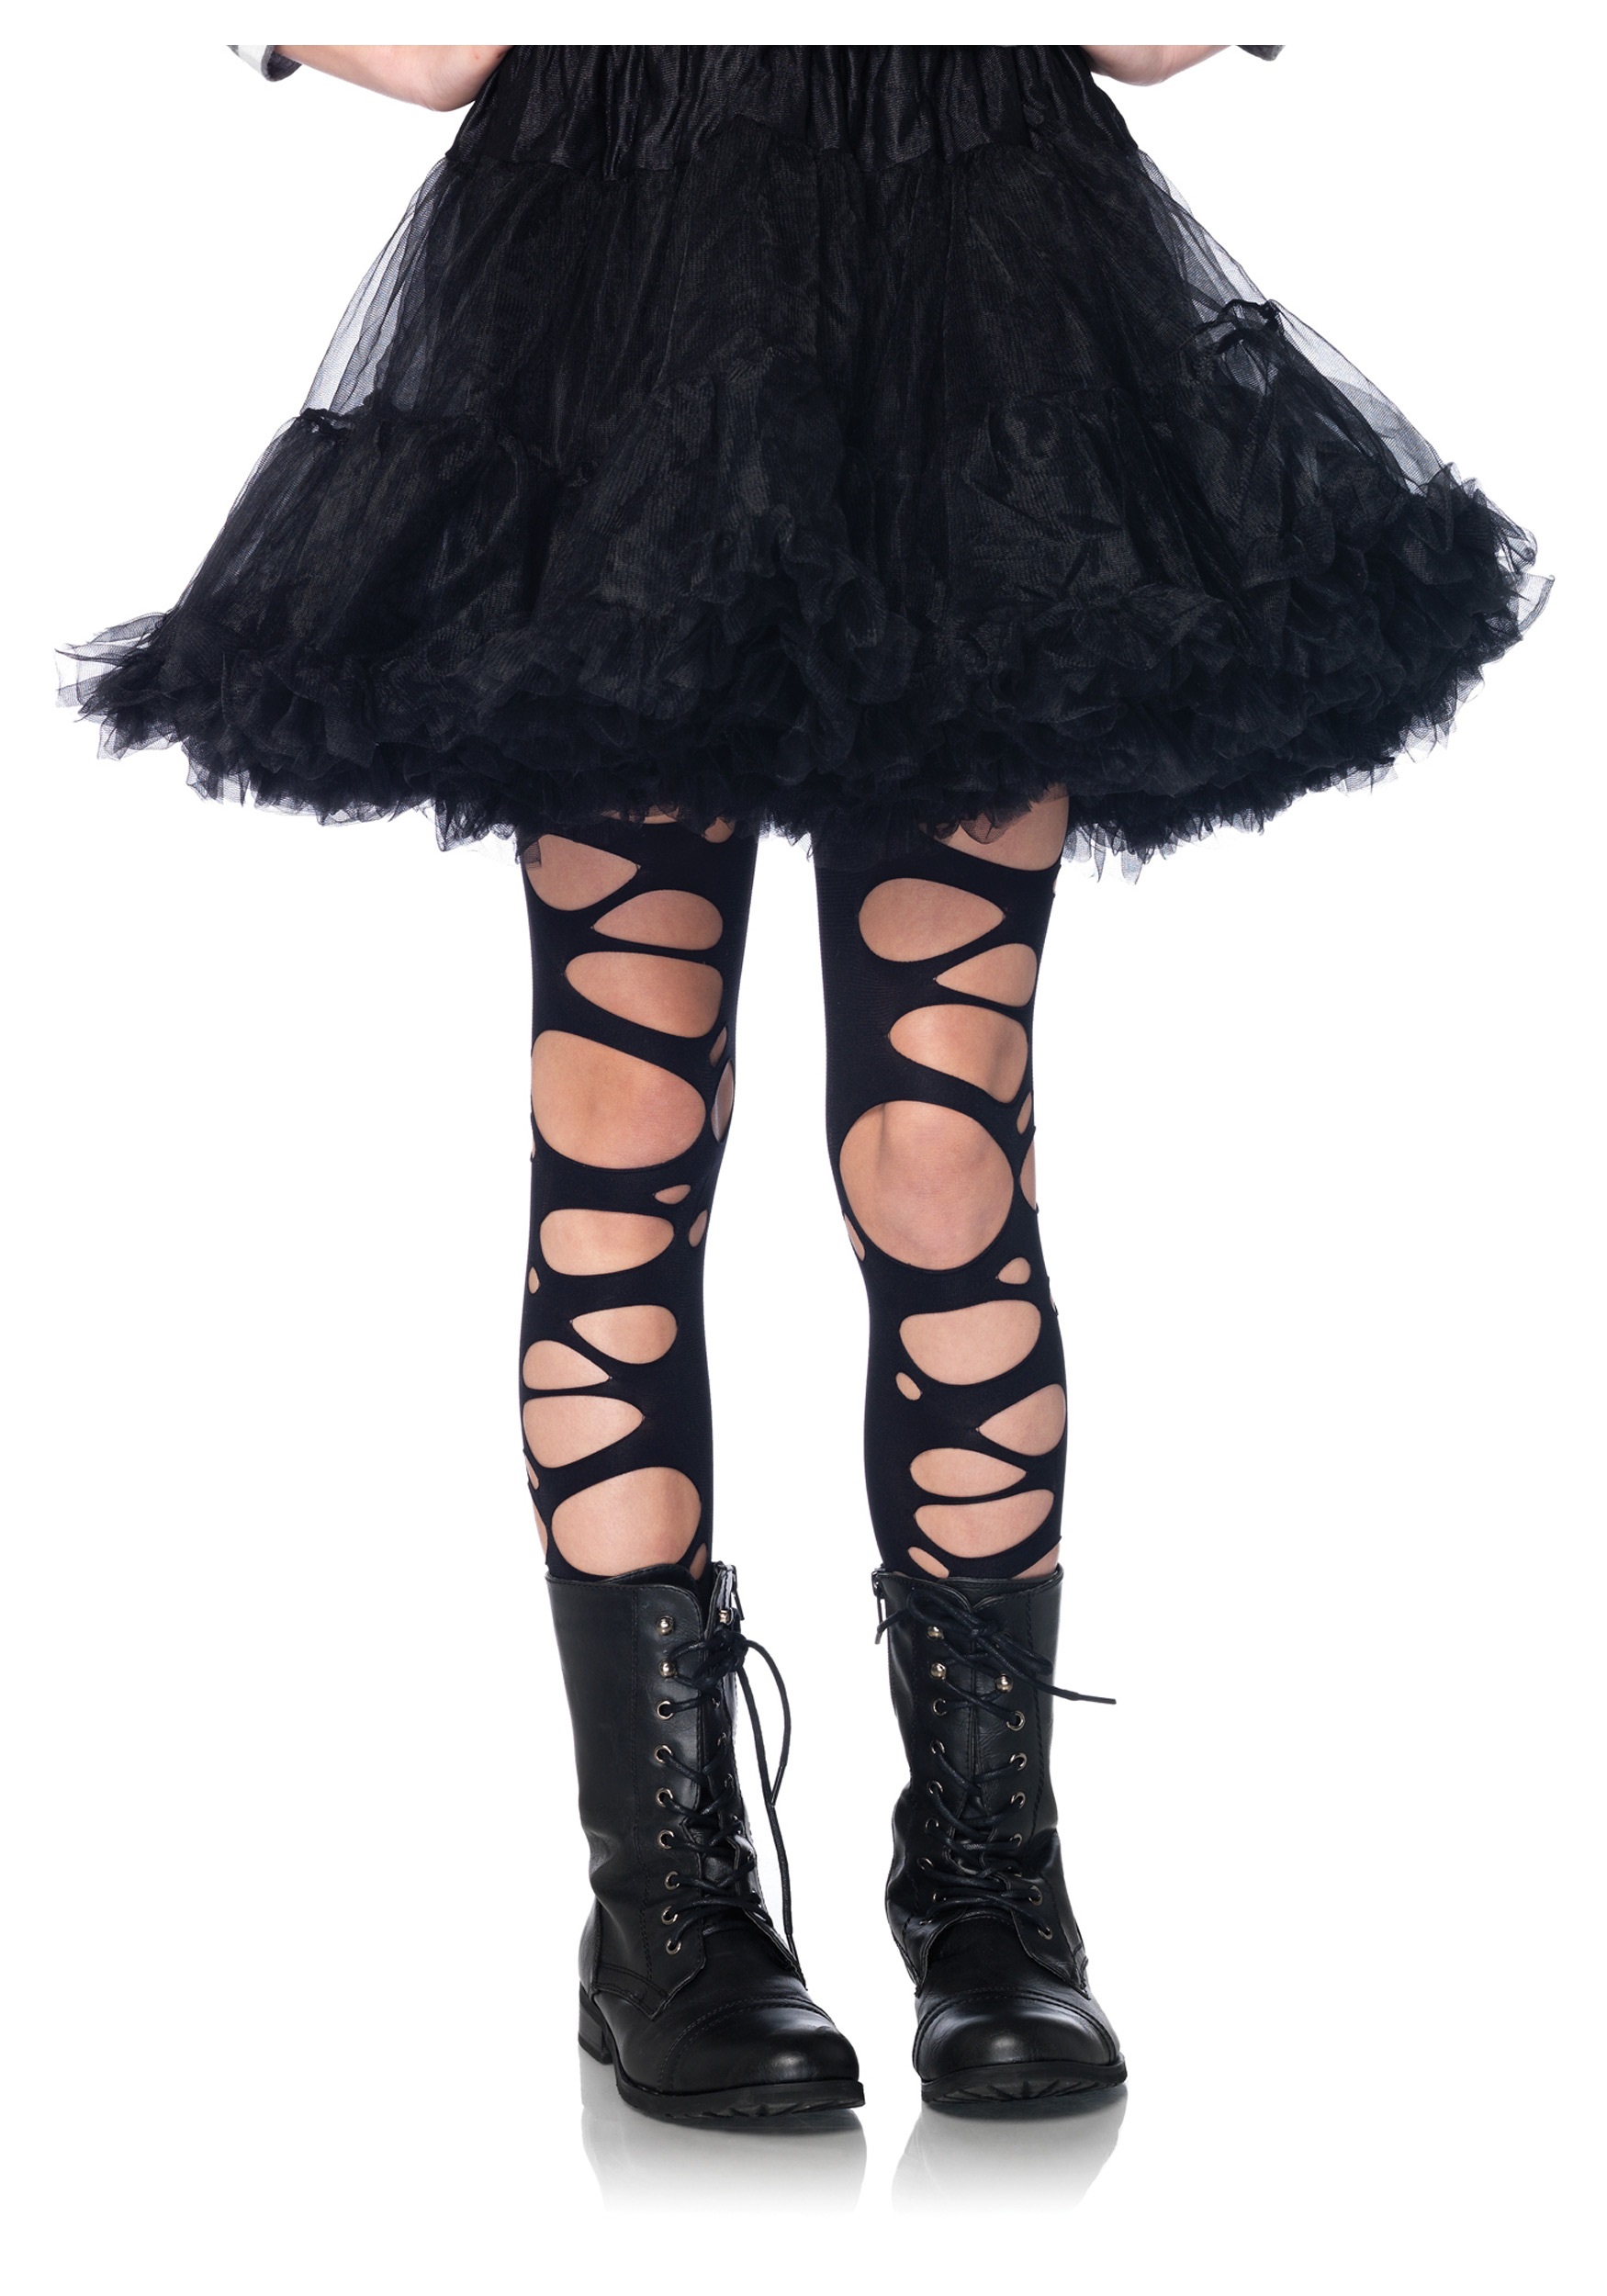 Girl's Tattered Gothic Black Tights